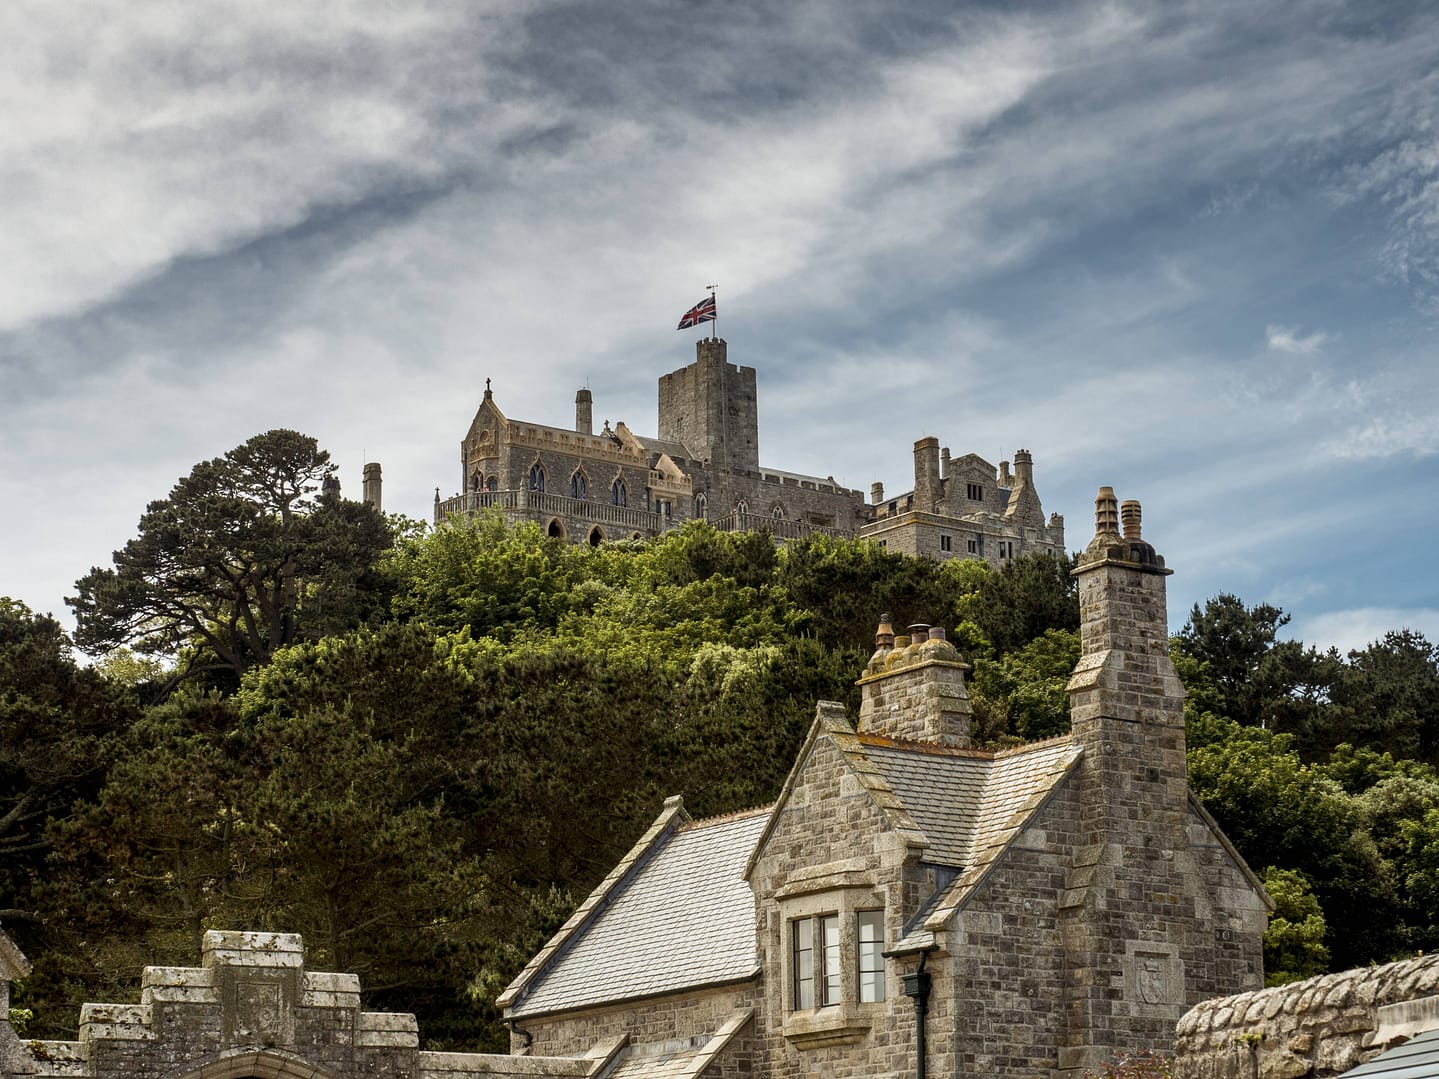 The Castle of Mount St. Michael is a former monastery from the 12th century.  (Source: Imago / Richard Bowden)